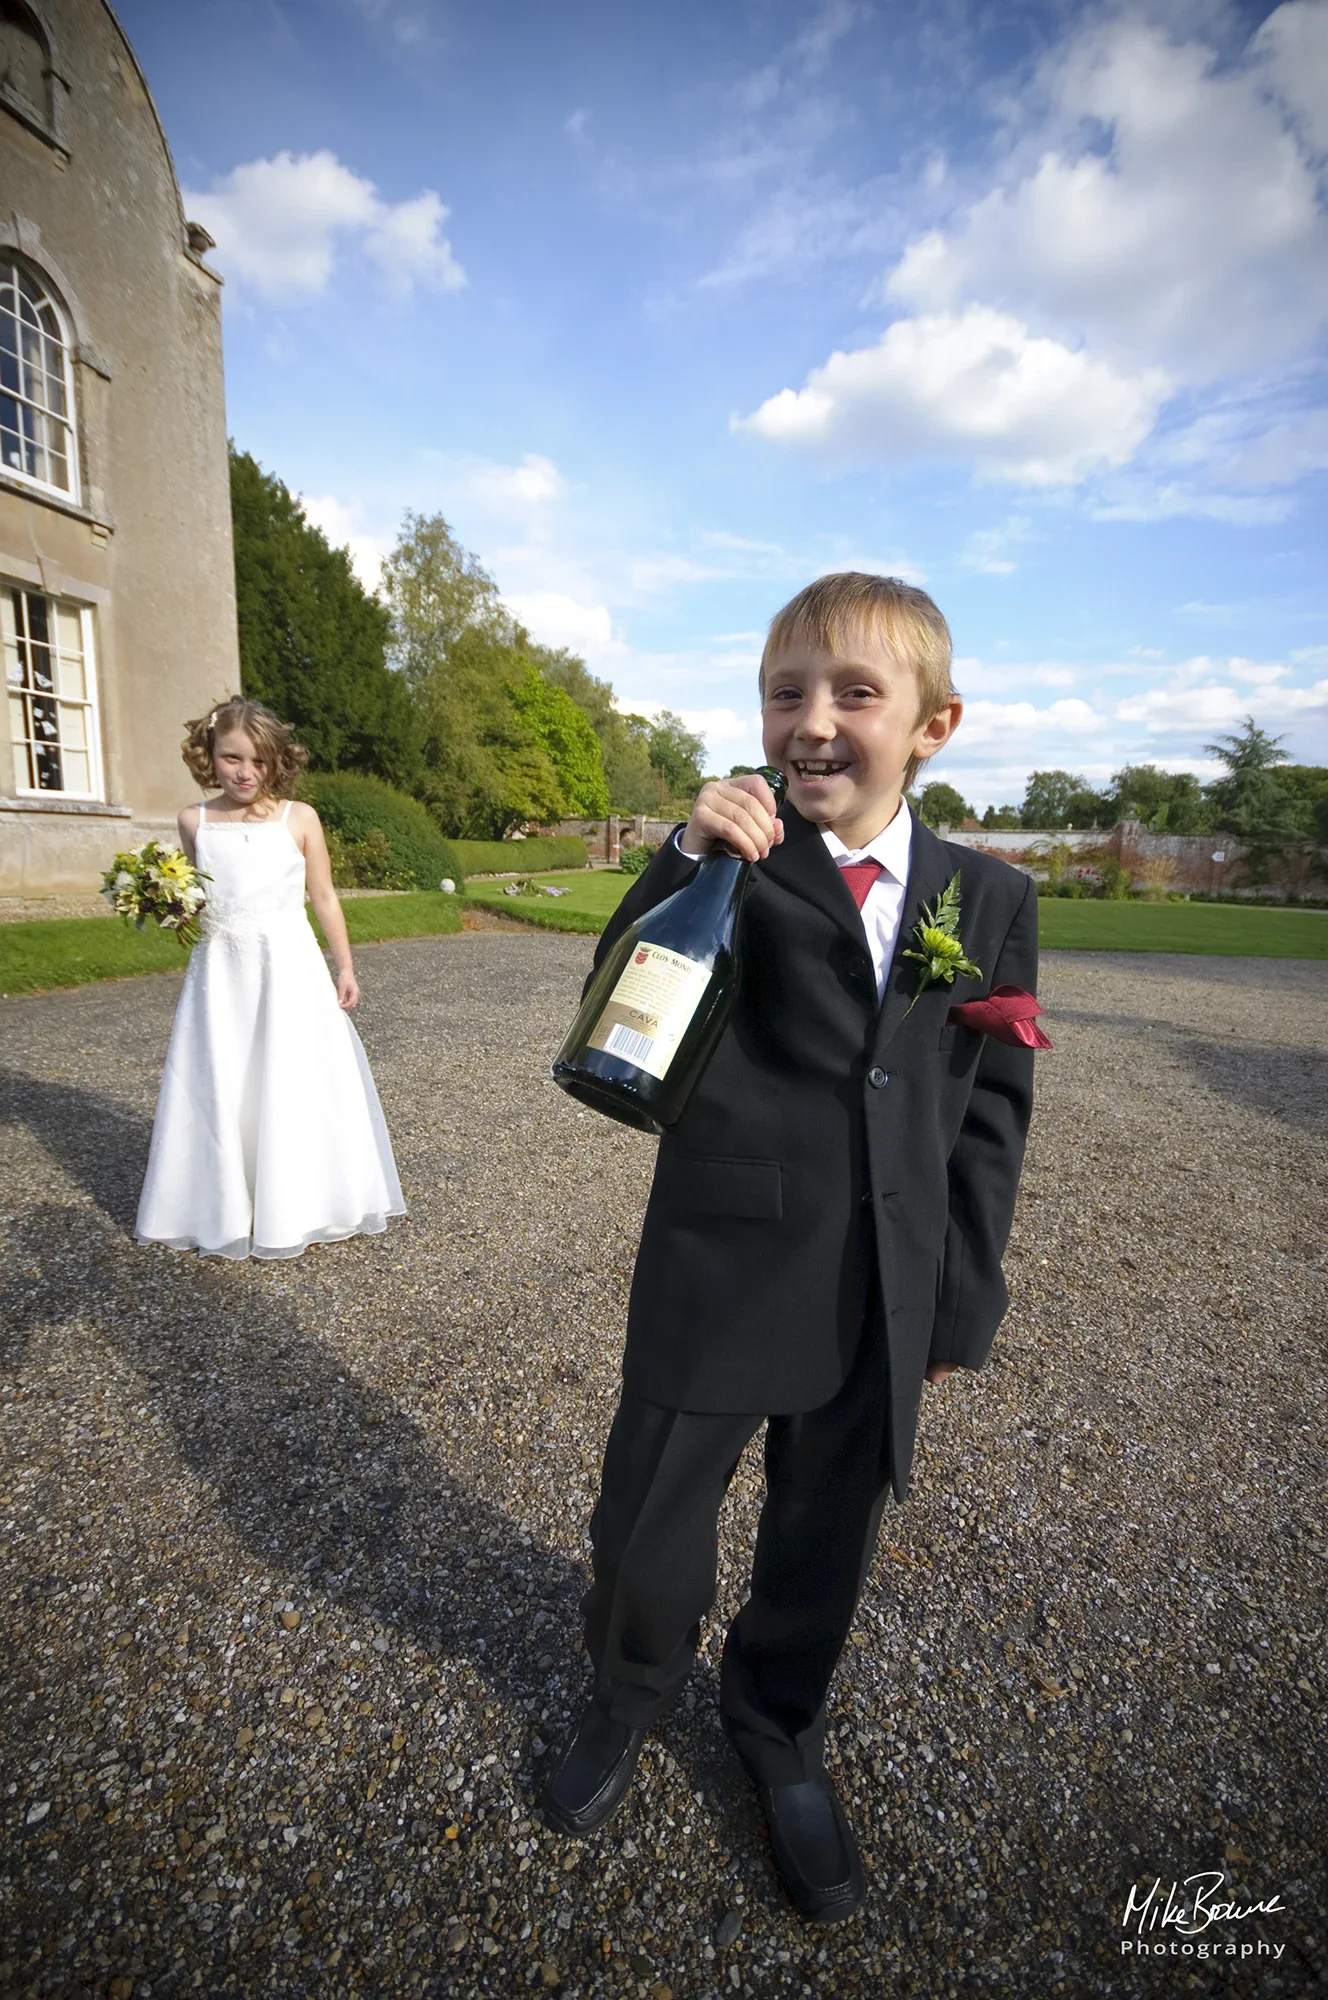 Young grinning page boy with a bottle of Champagne outside wedding reception being watched by a Bridesmaid